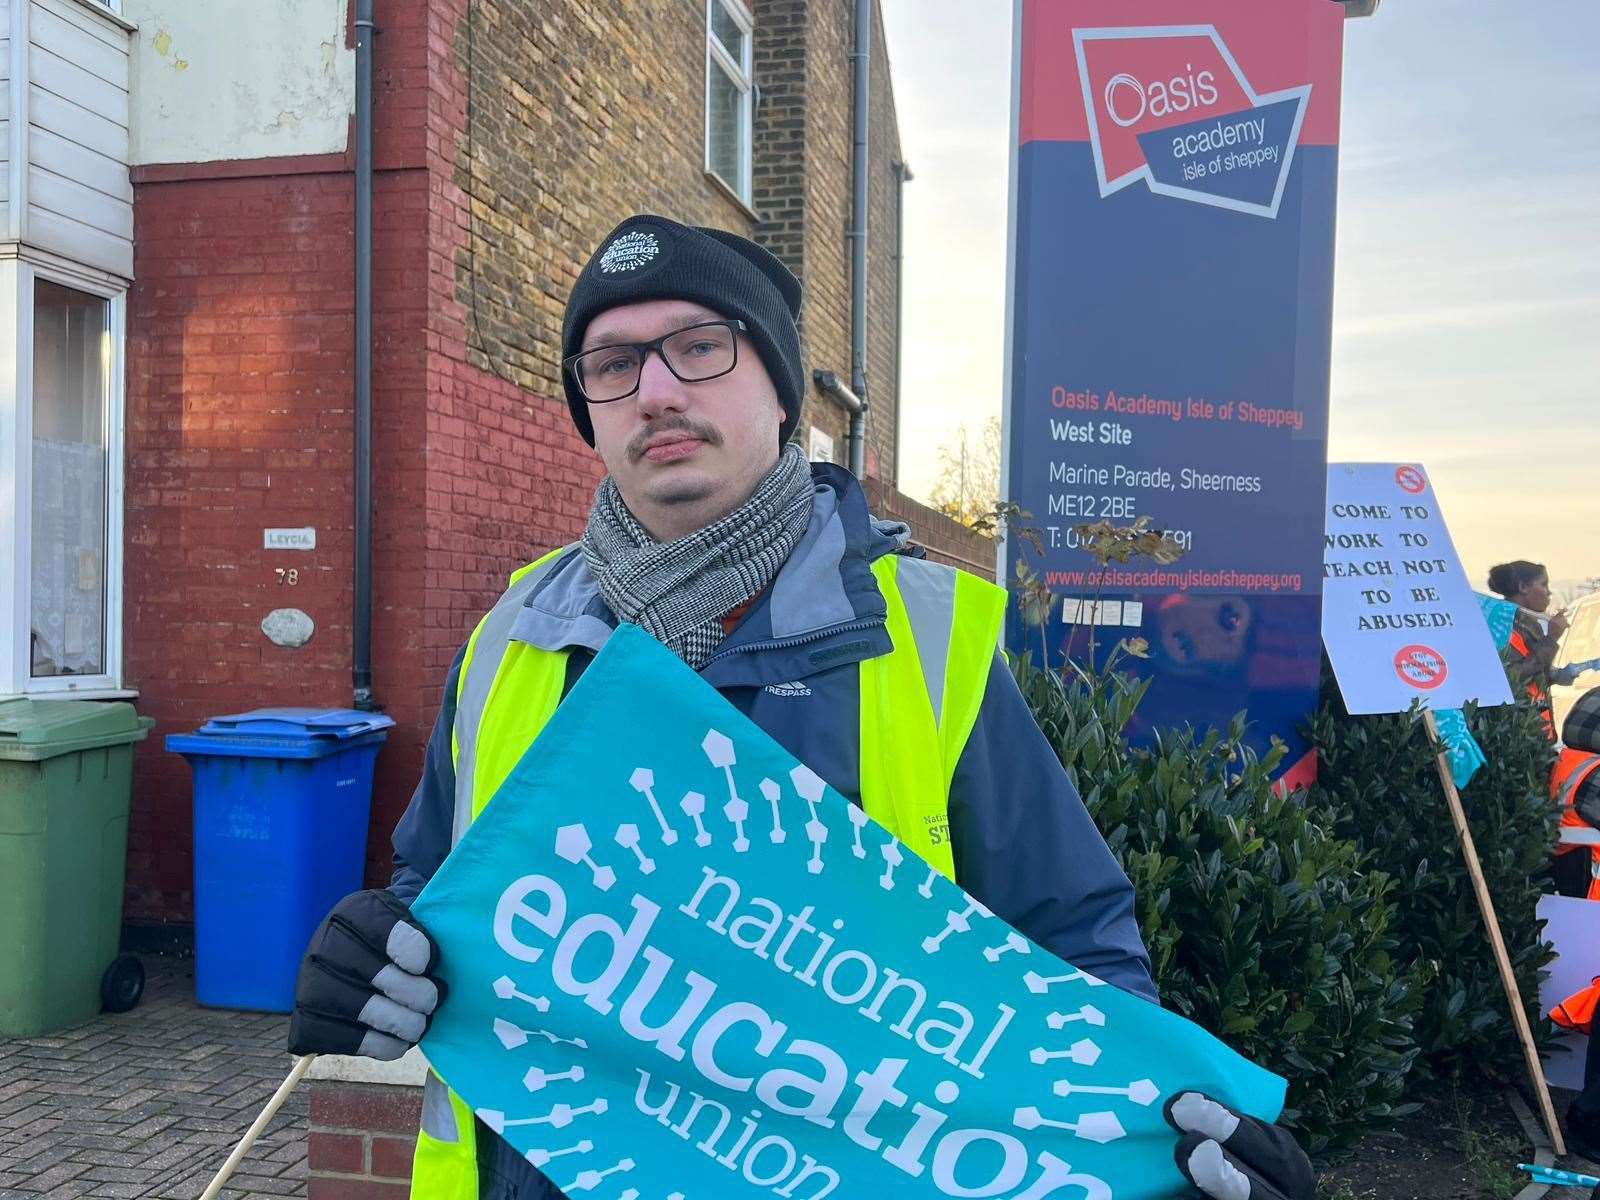 Head of philosophy and ethics Austen Waite said he was striking for the safety of students and staff